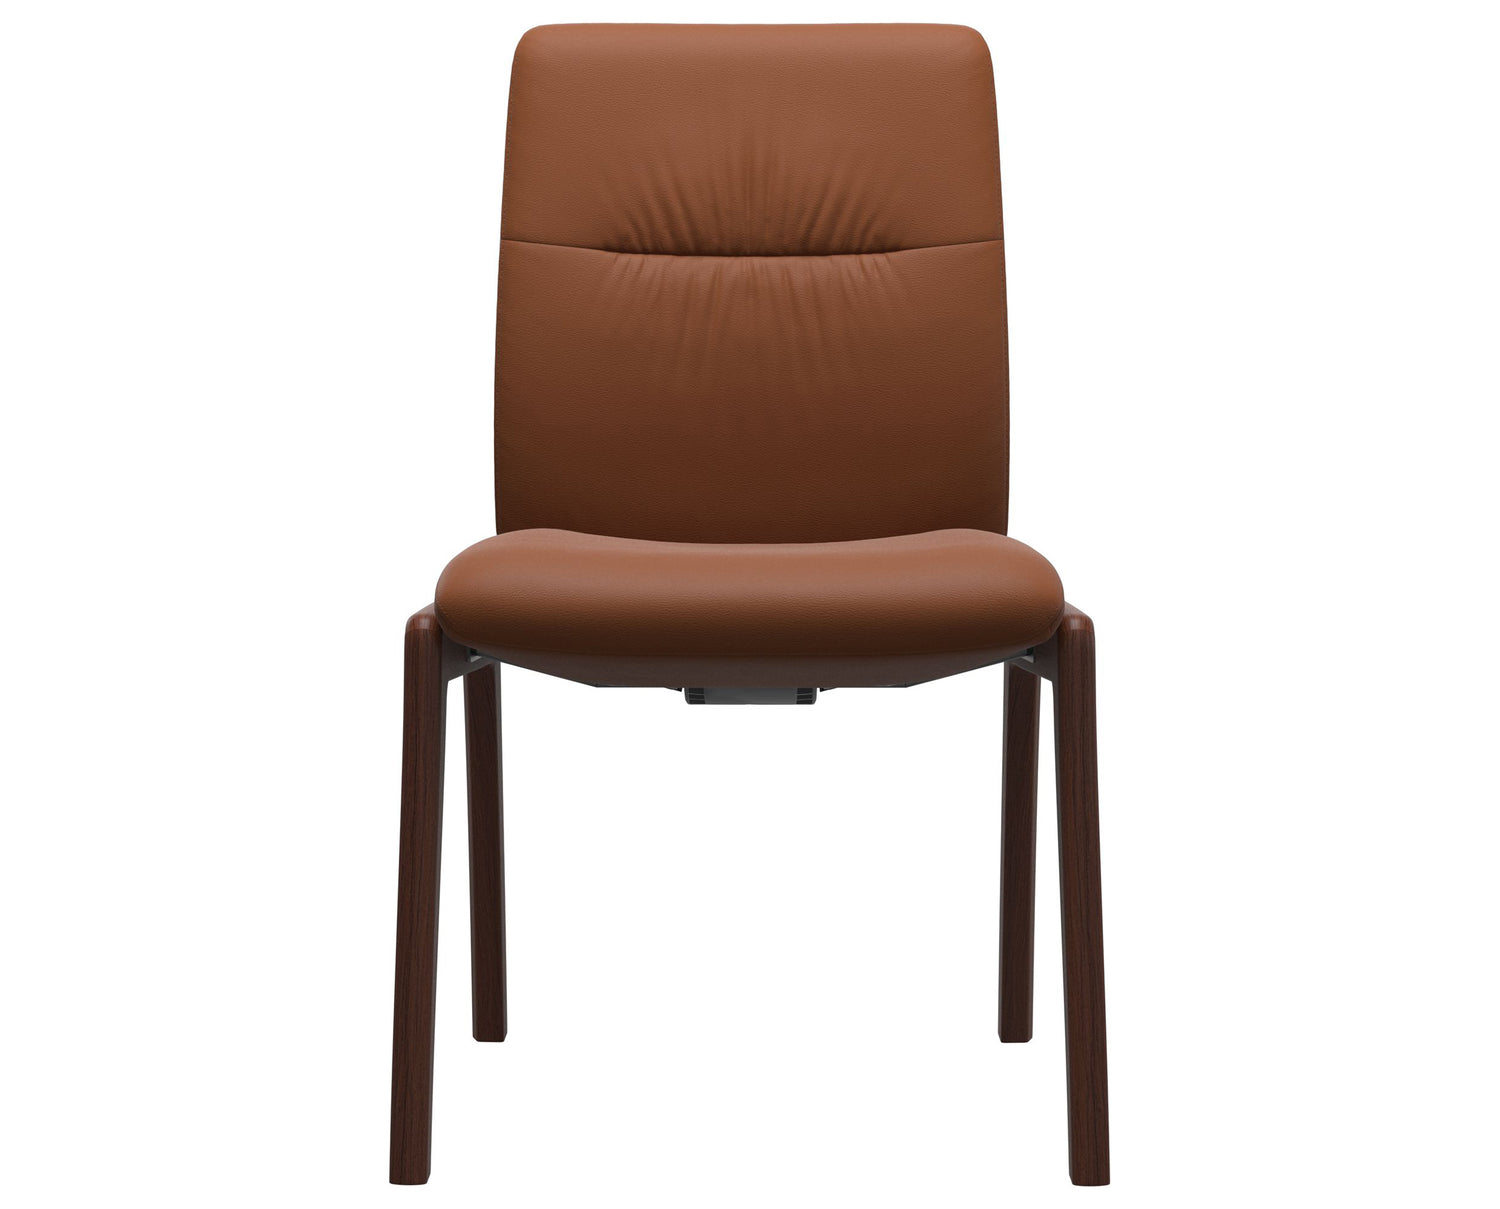 Paloma Leather New Cognac & Walnut Base | Stressless Mint Low Back D100 Dining Chair | Valley Ridge Furniture